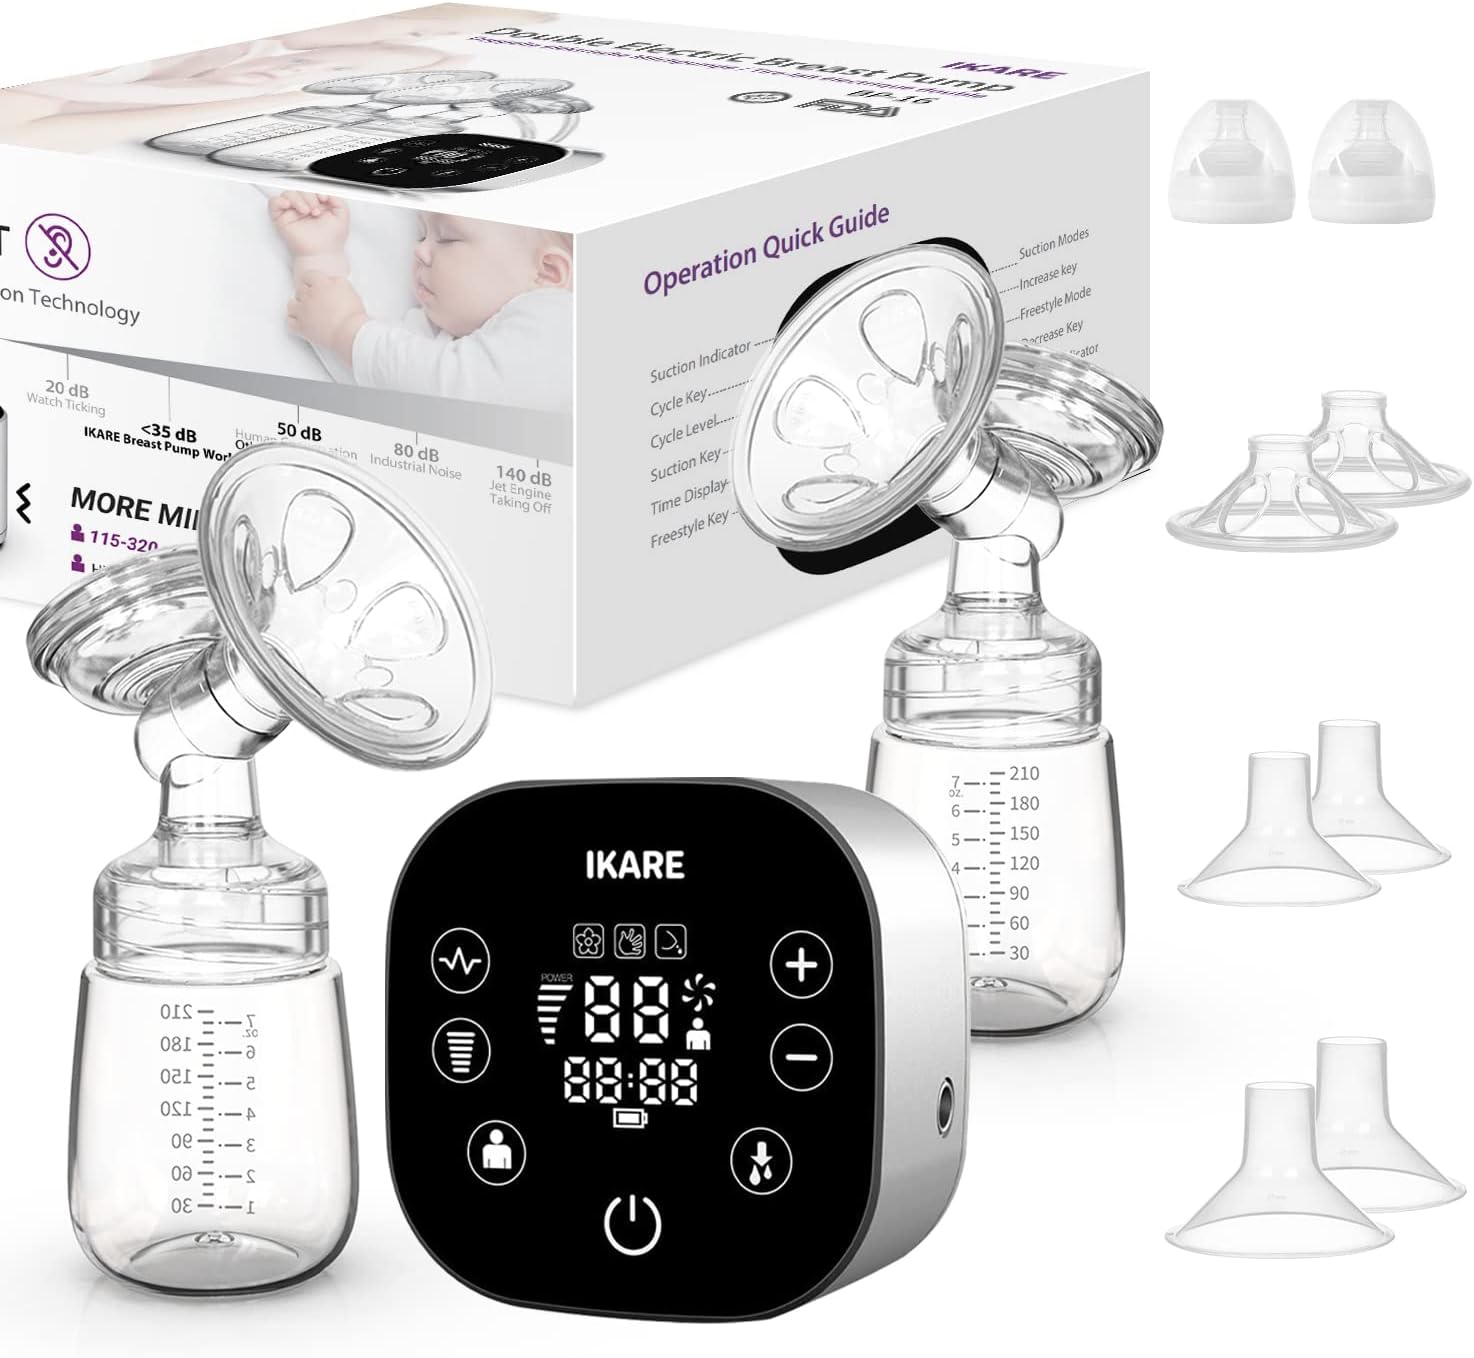 IKARE Hospital Grade Double Electric Breast Pumps for Travel  Home Free-Style, 6 Modes  150 Levels  3 Size Flanges, Touchscreen LED Display, Pain Free Portable, Super Quiet